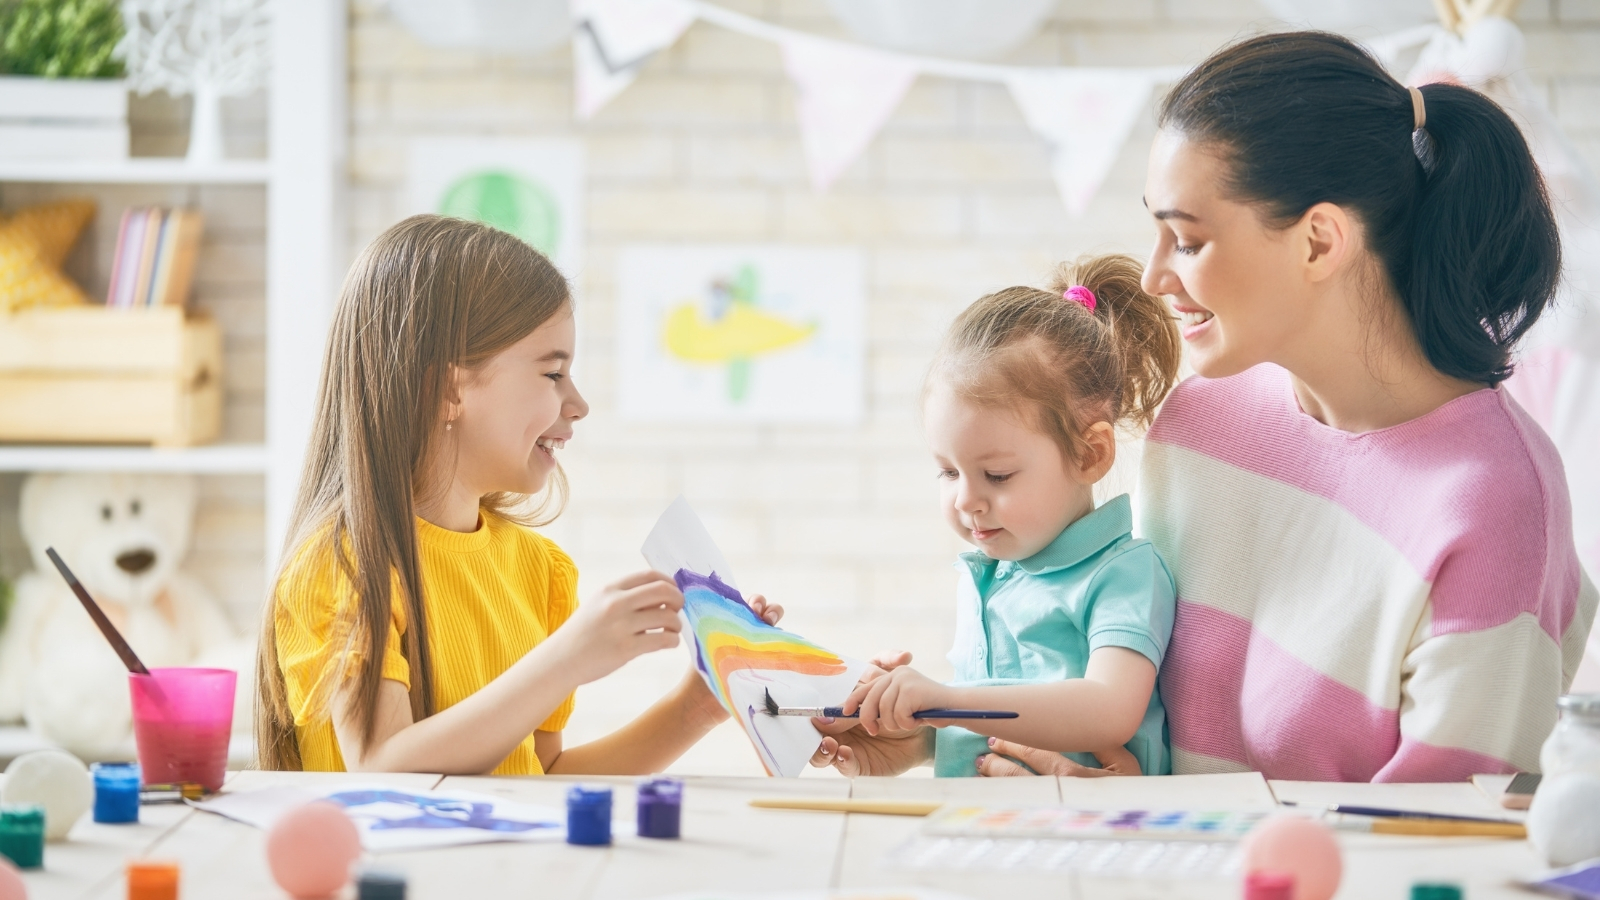 March activities: Easy and fun ideas to try with your kids